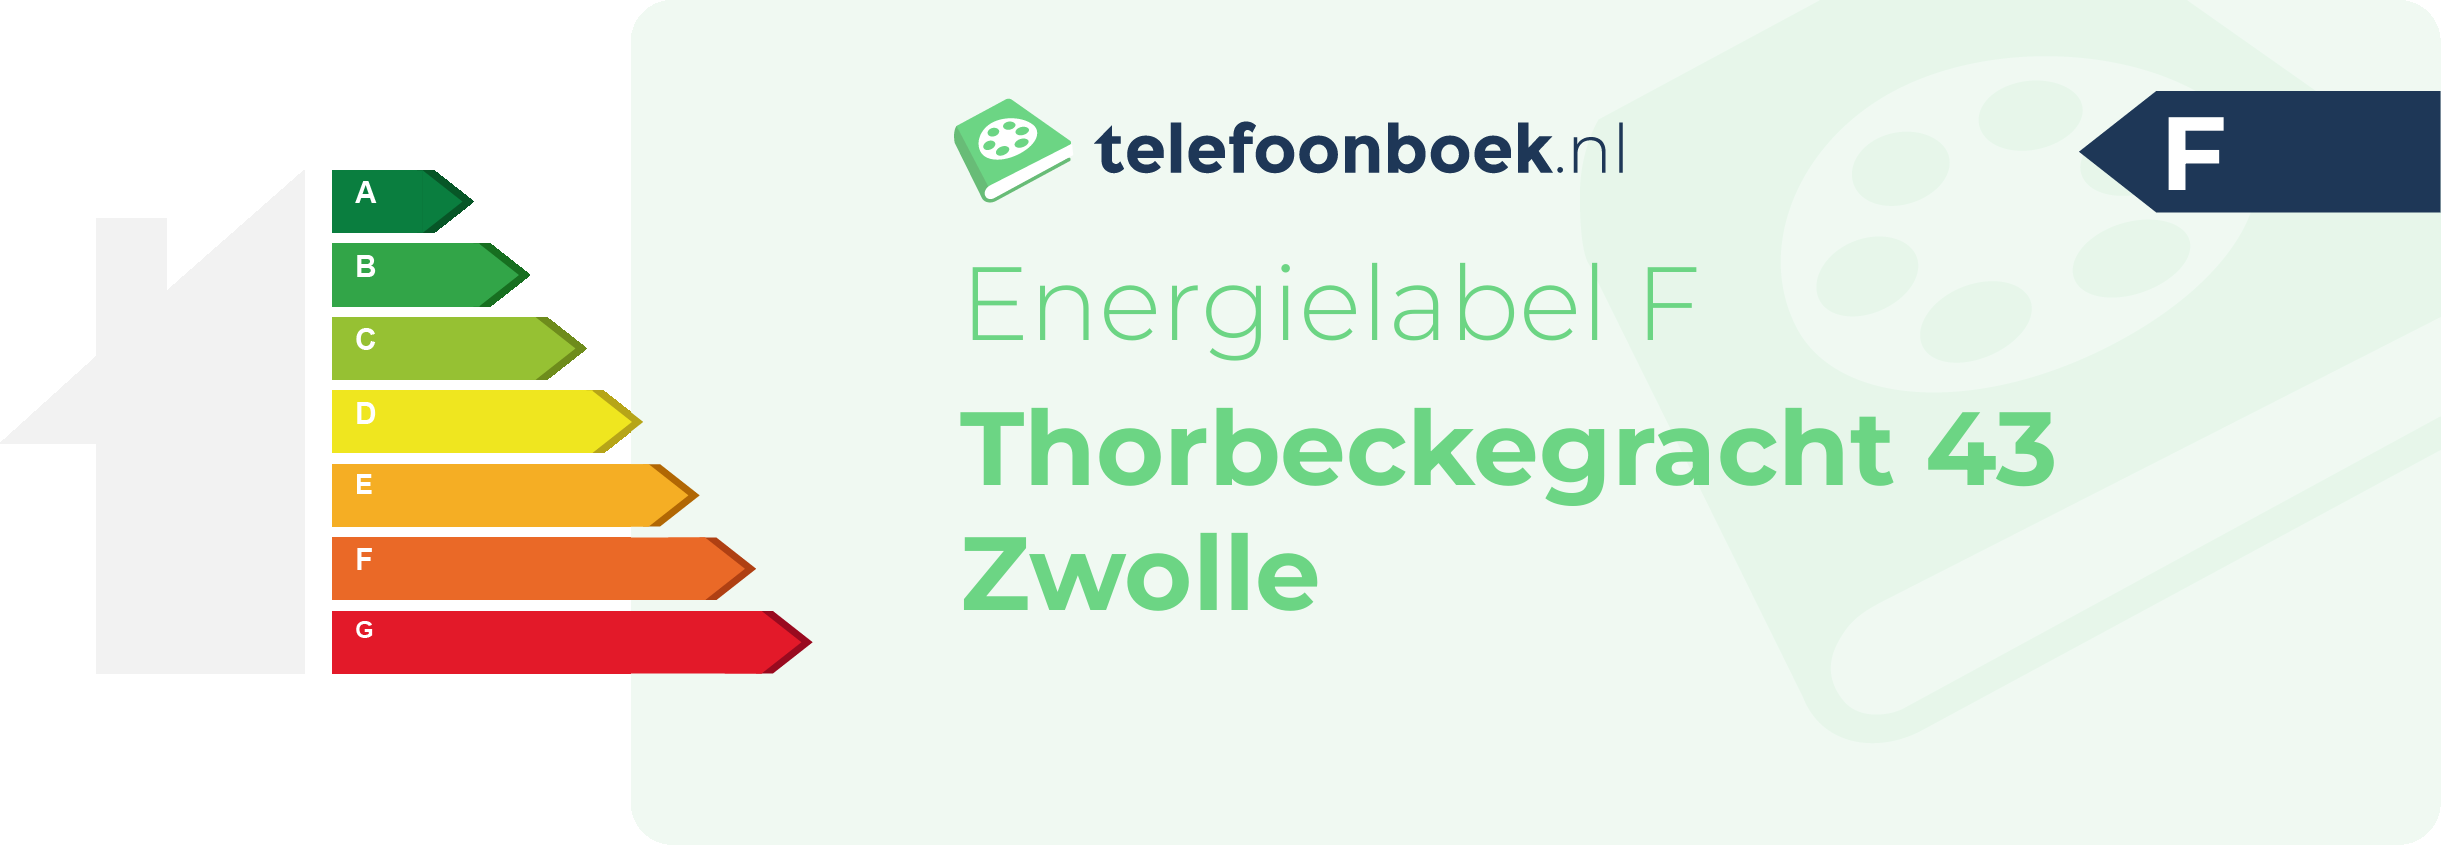 Energielabel Thorbeckegracht 43 Zwolle